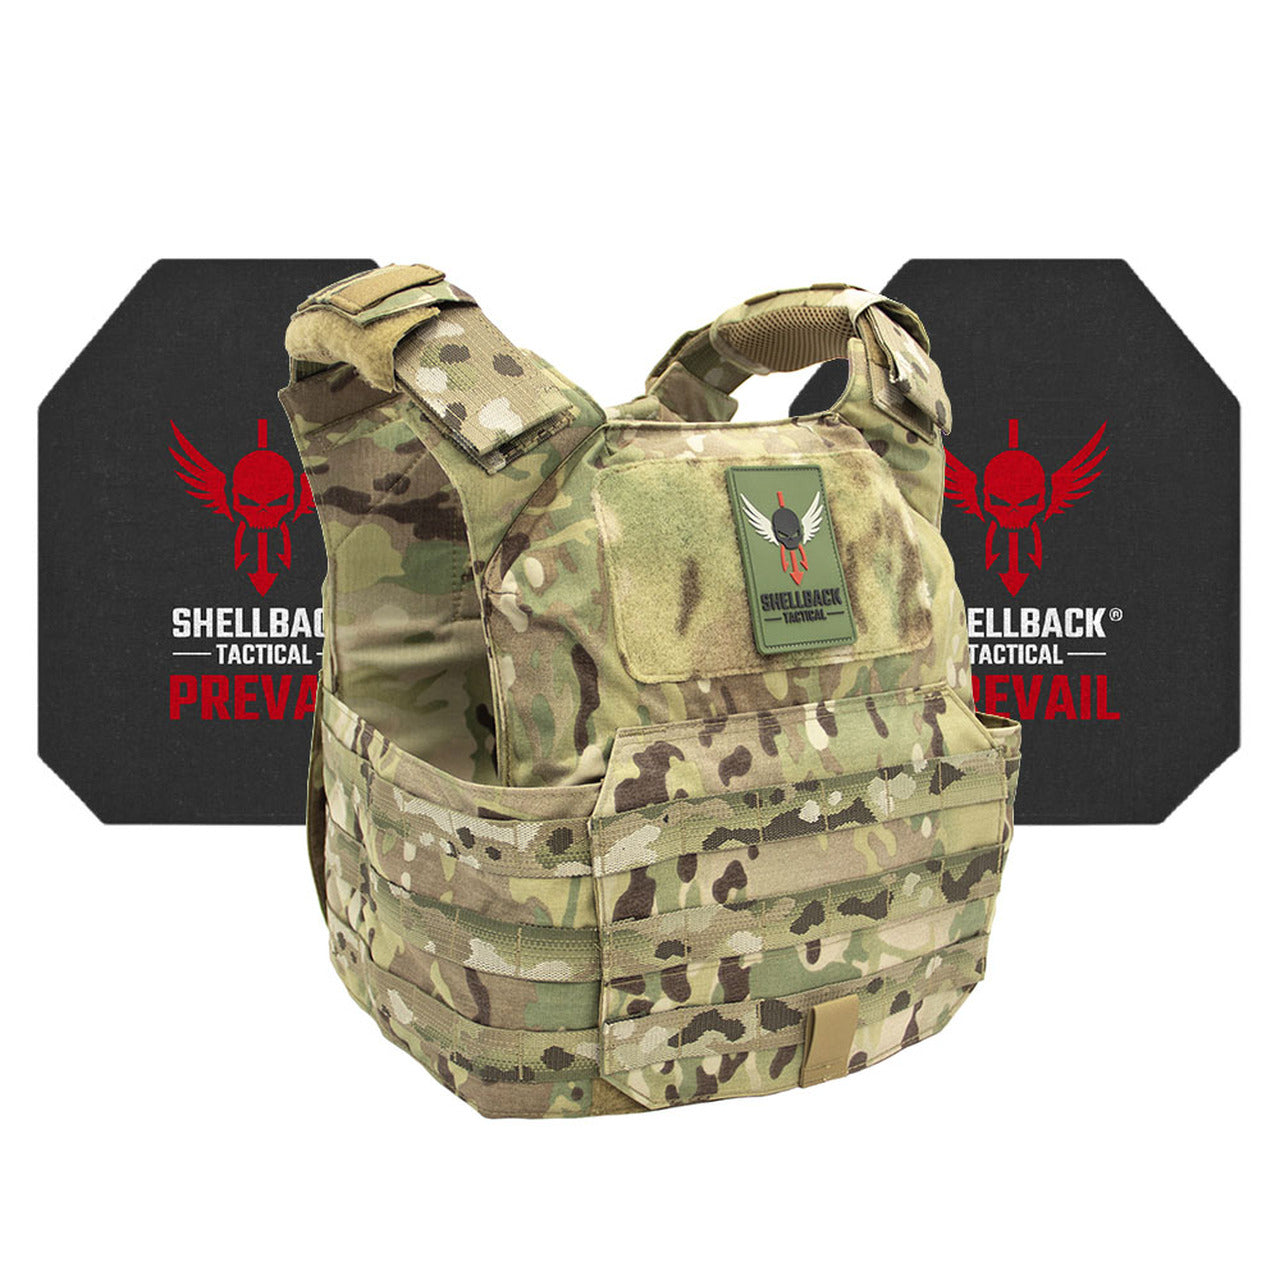 A Shellback Tactical Patriot Active Shooter Kit with Level IV Model 4S17 Armor Plates in Ranger Green camouflage pattern.